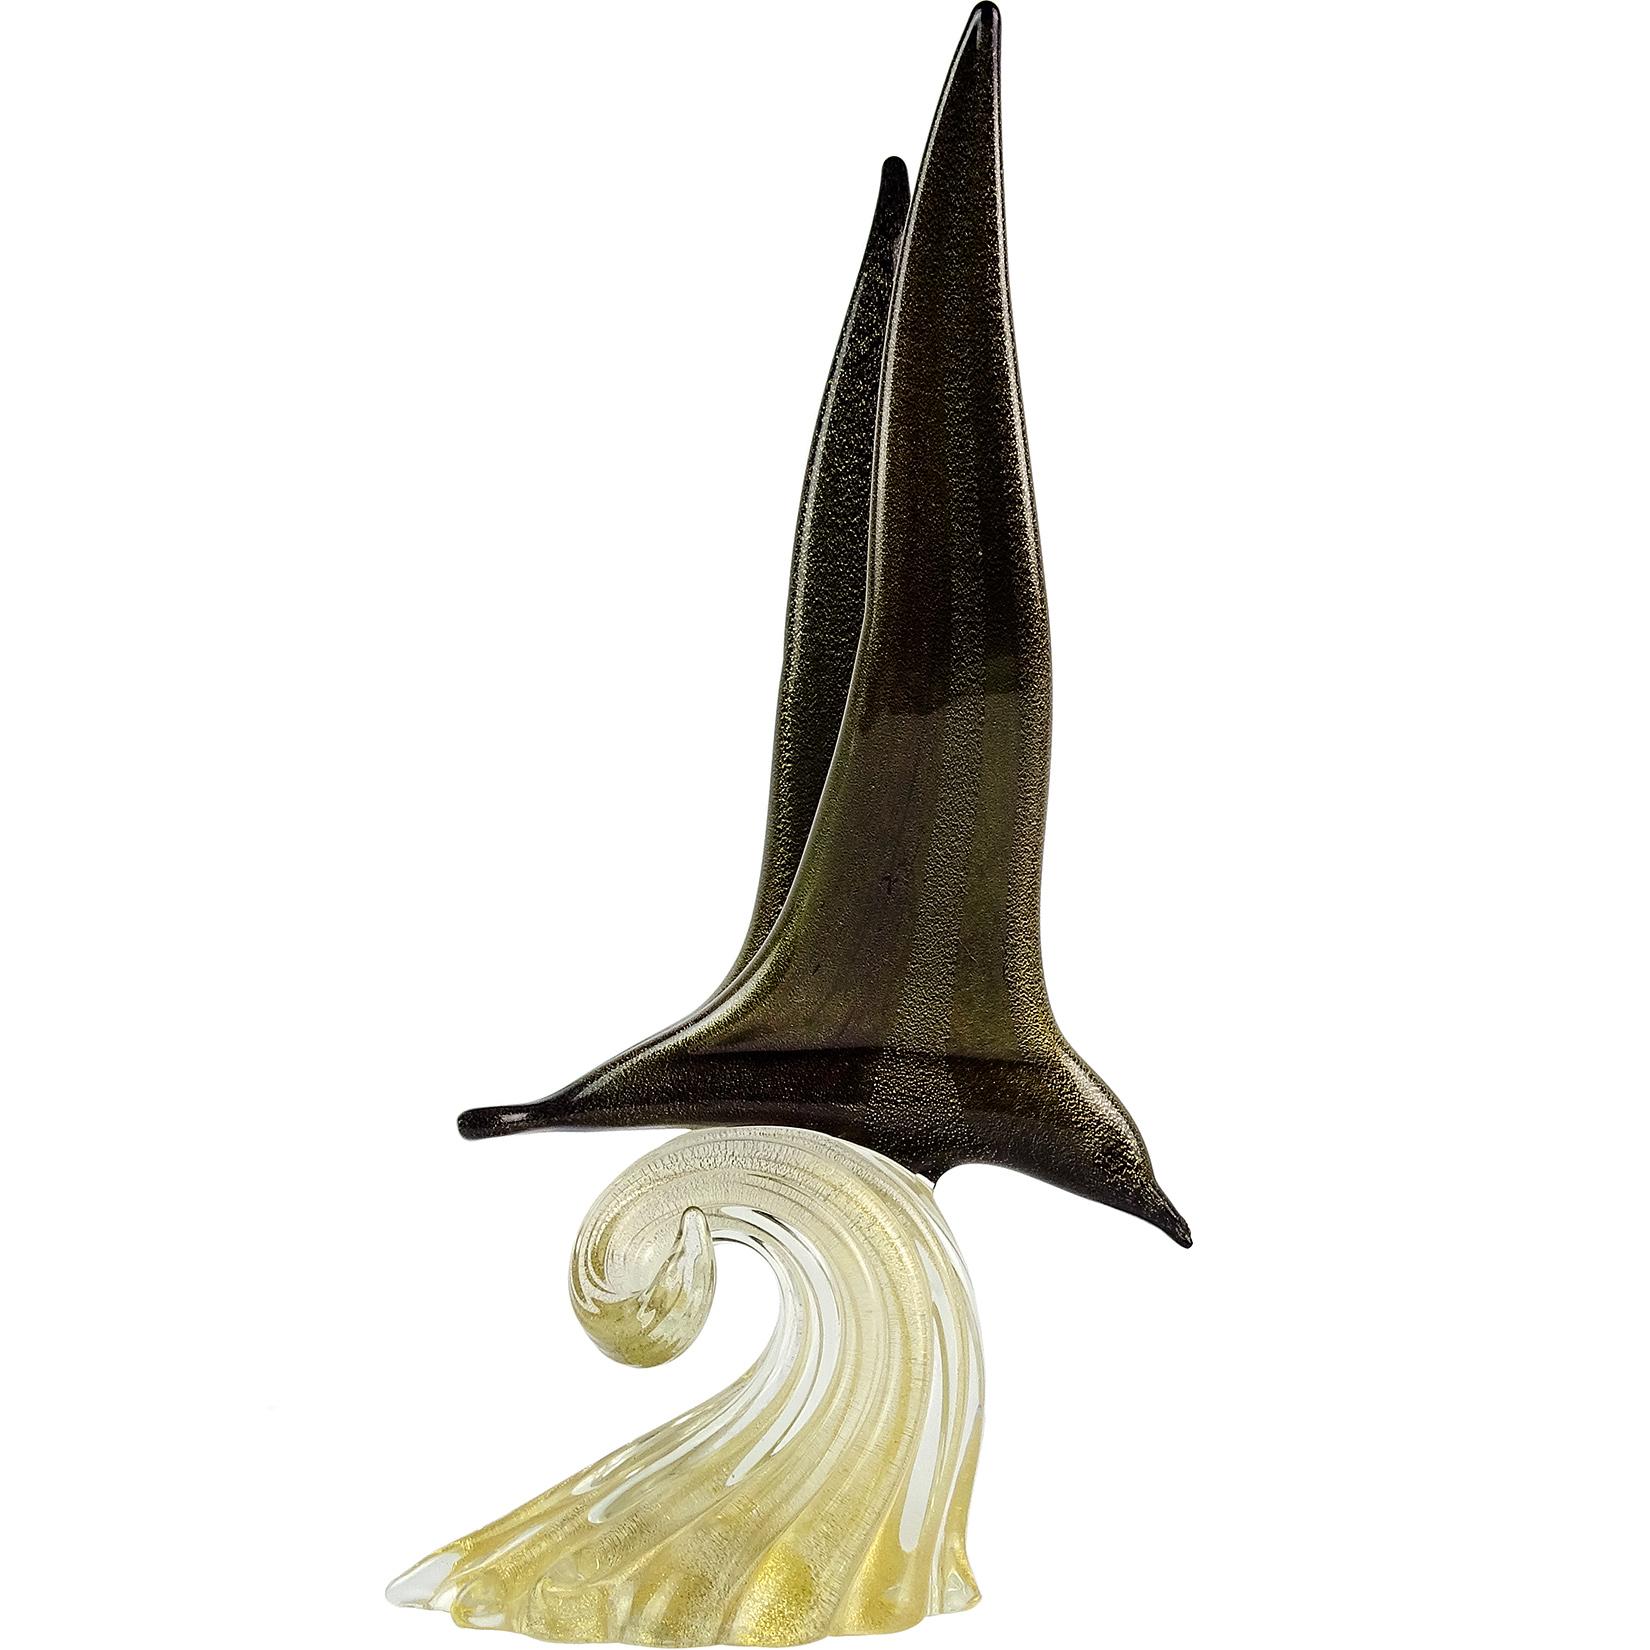 Beautiful vintage Murano hand blown black and gold flecks Italian art glass flying seagull over water sculpture. Signed underneath, Archimede Seguso Murano, circa 1960-1970. The bird stands on a wave of glass filled with gold leaf. The signature was